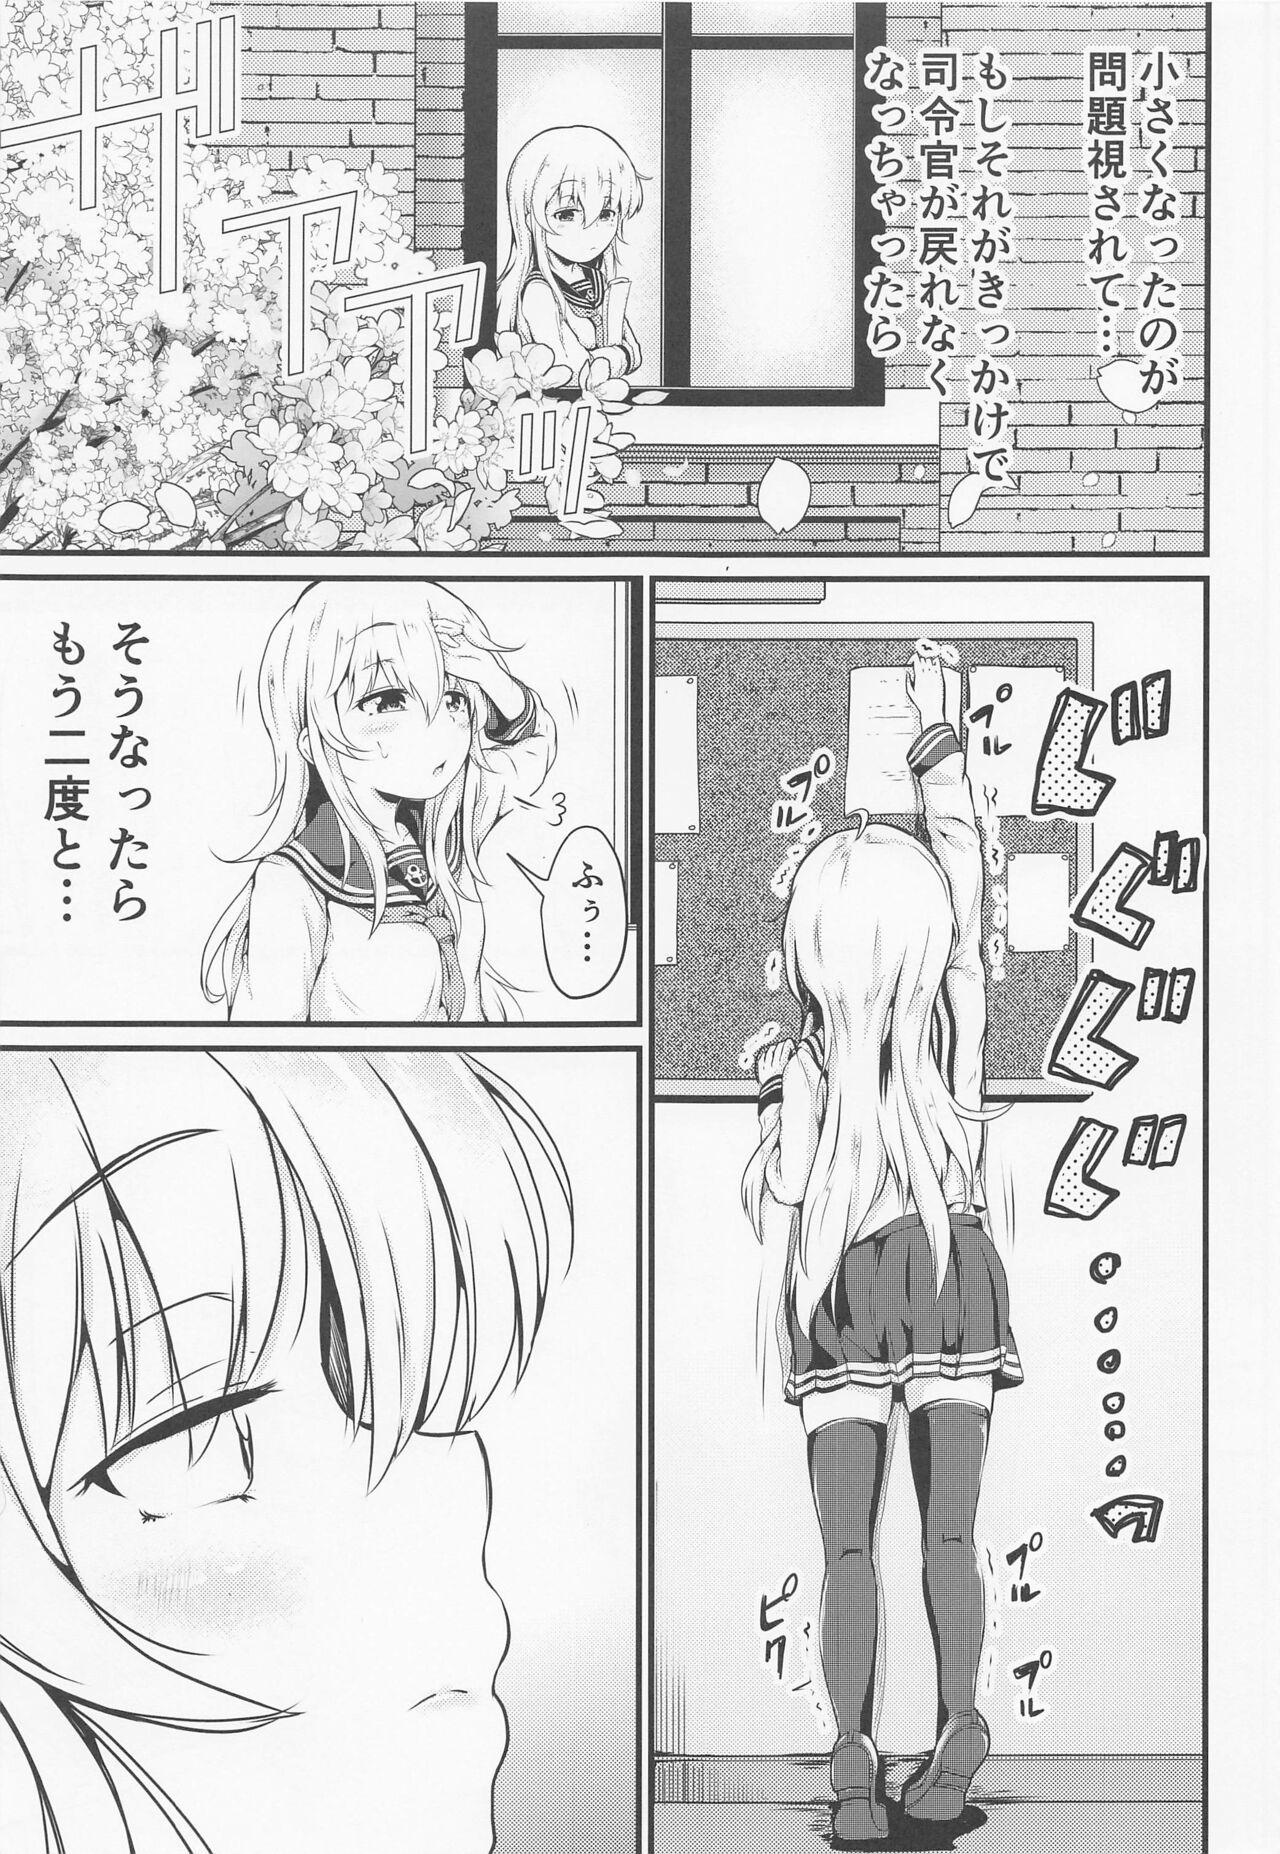 Amazing Hibiki datte Onee-chan 5 - Kantai collection Spy Camera - Page 4